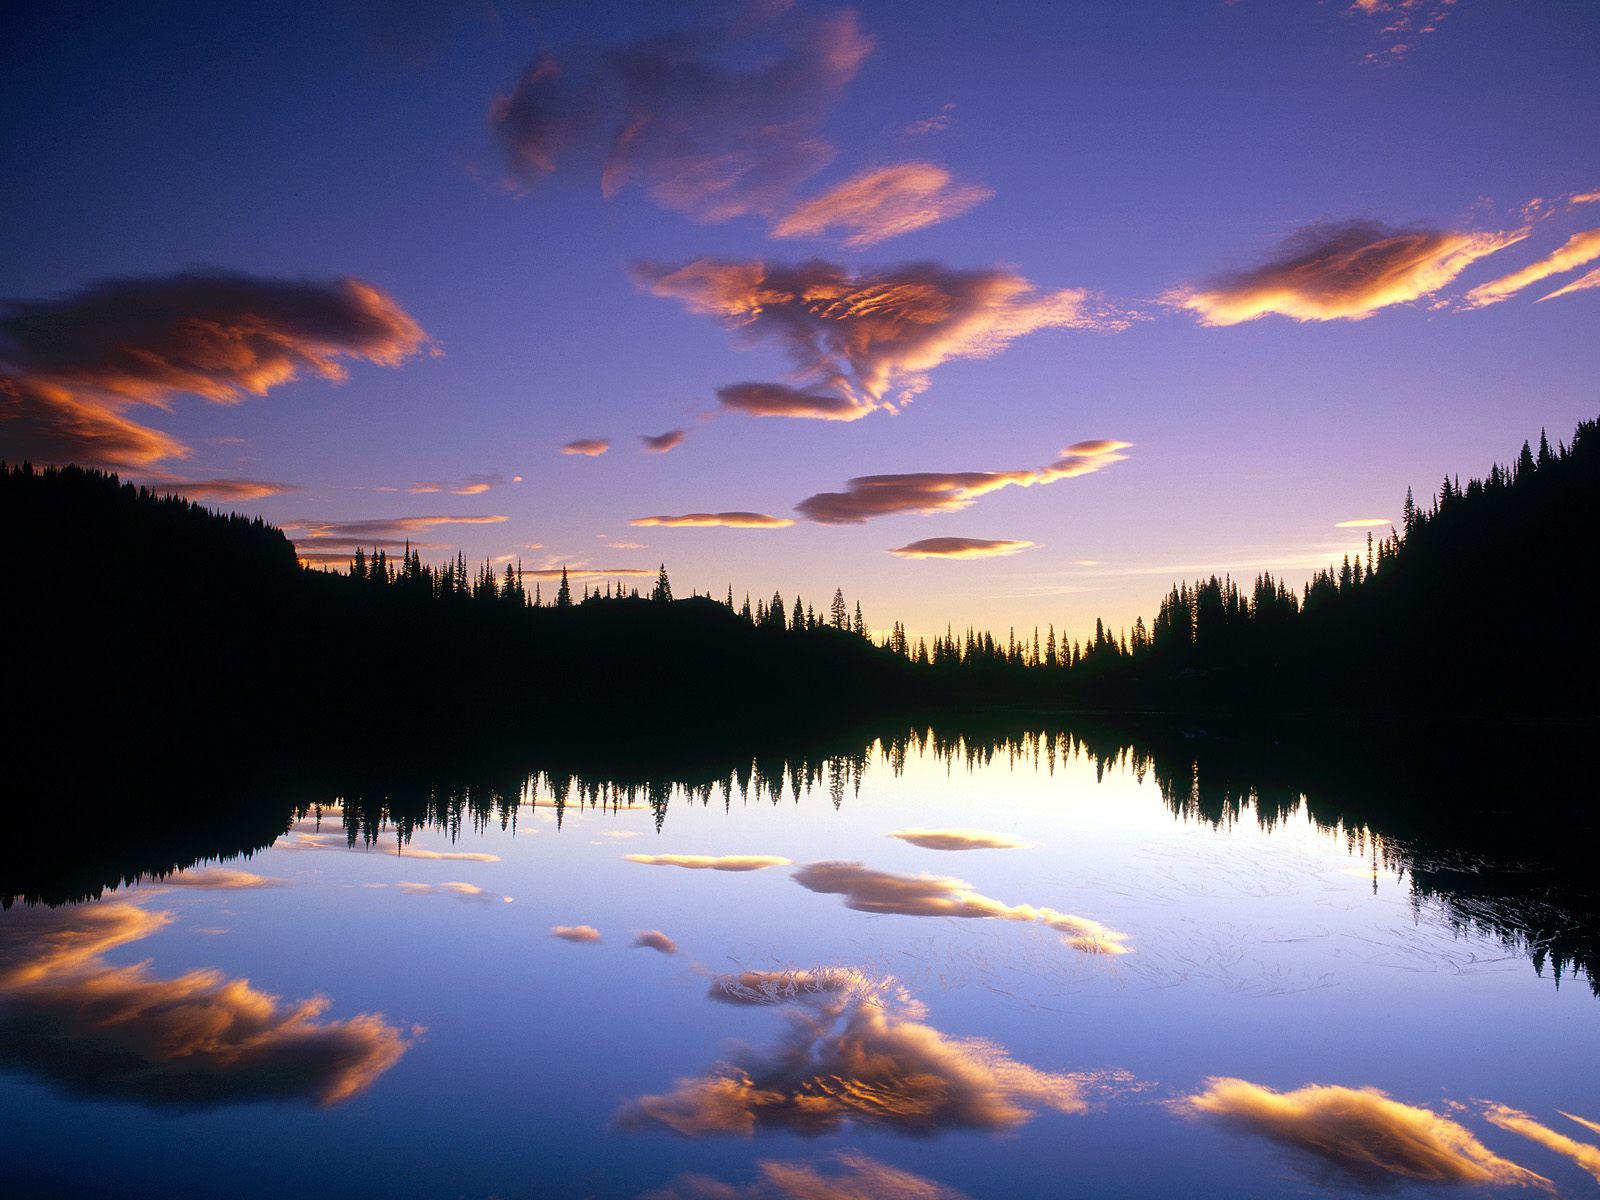 11 Awesome Reflection Pictures To Amaze You - Awesome 11